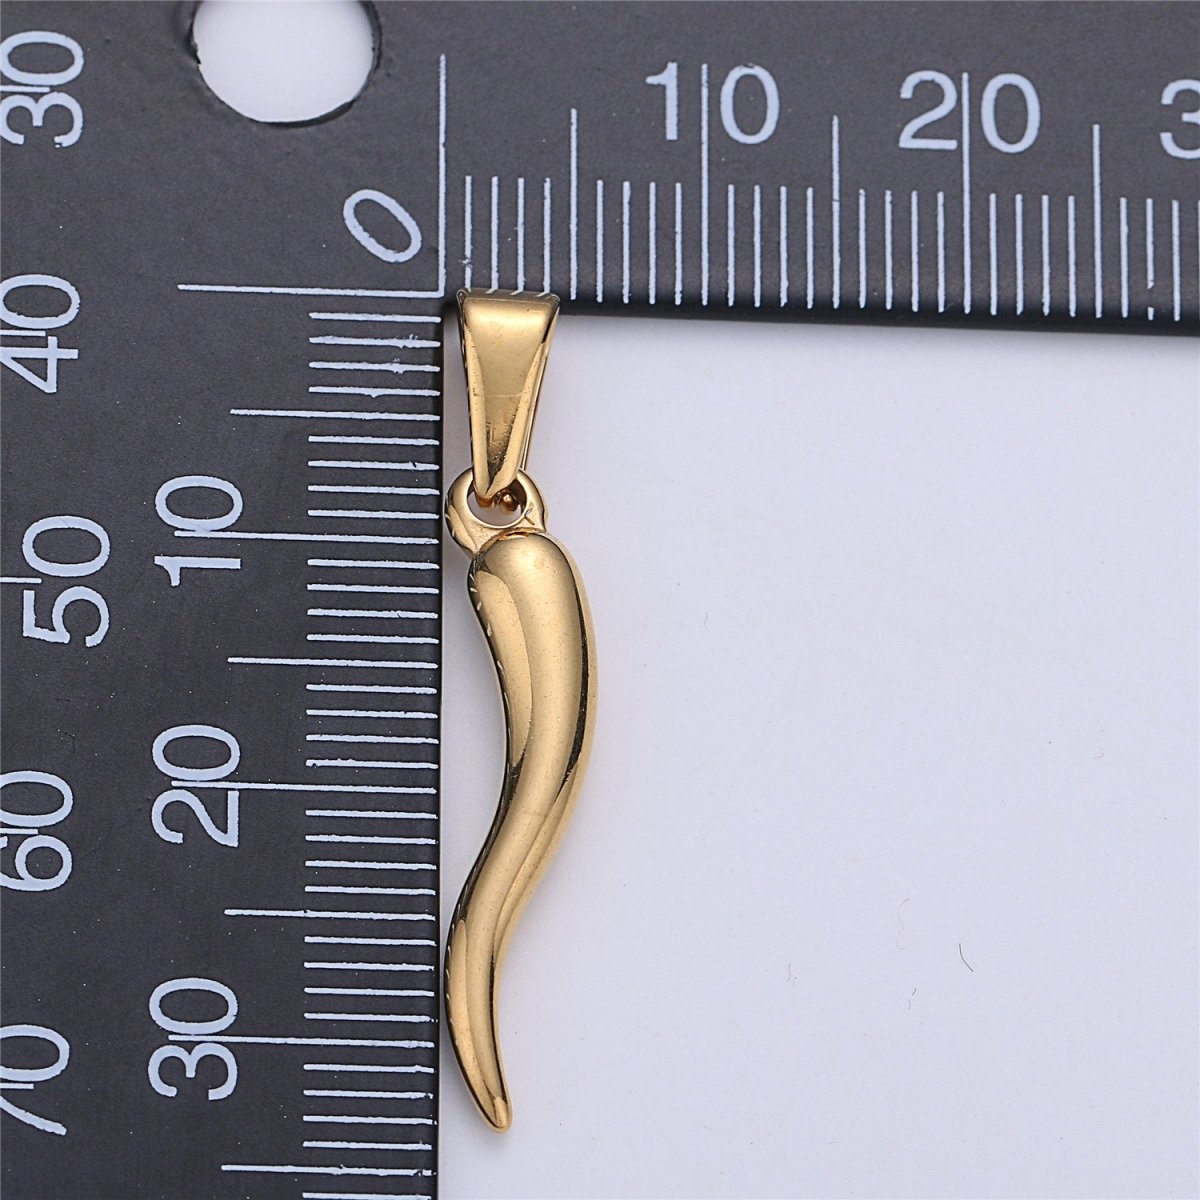 18K Gold Filled Italian Horn Charm Cornicello cornetto Good Luck Protection Amulet Pendant for Necklace Jewelry Making Supplies E-659 E-660 J-661 - DLUXCA